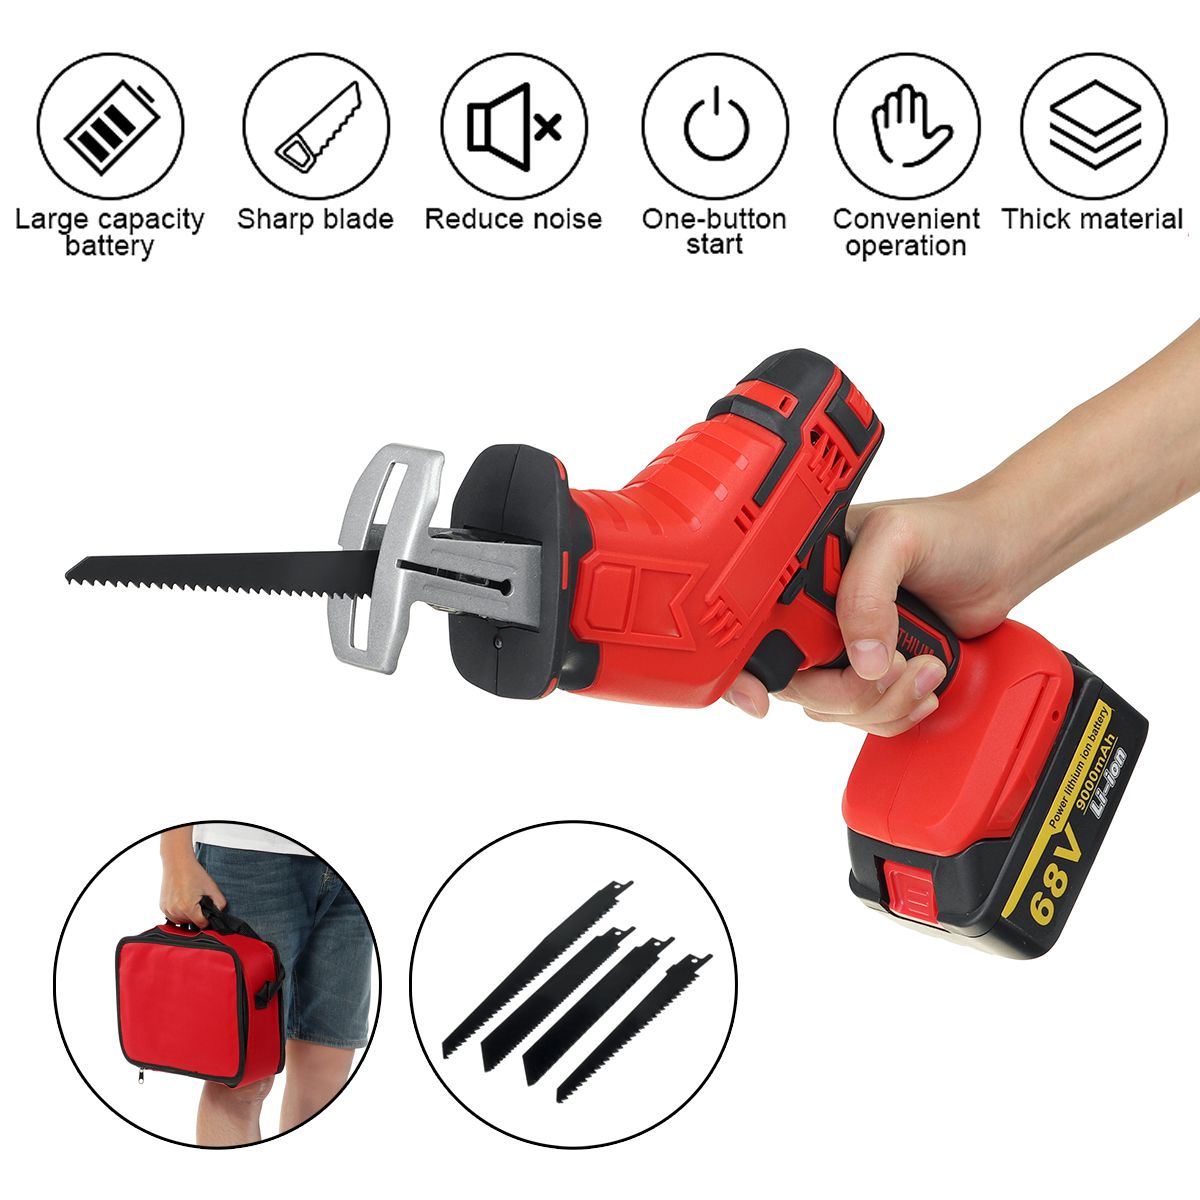 68V-9000mah-Electric-Reciprocating-Saw-Outdoor-Woodworking-Cordless-Portable-Saw-1683595